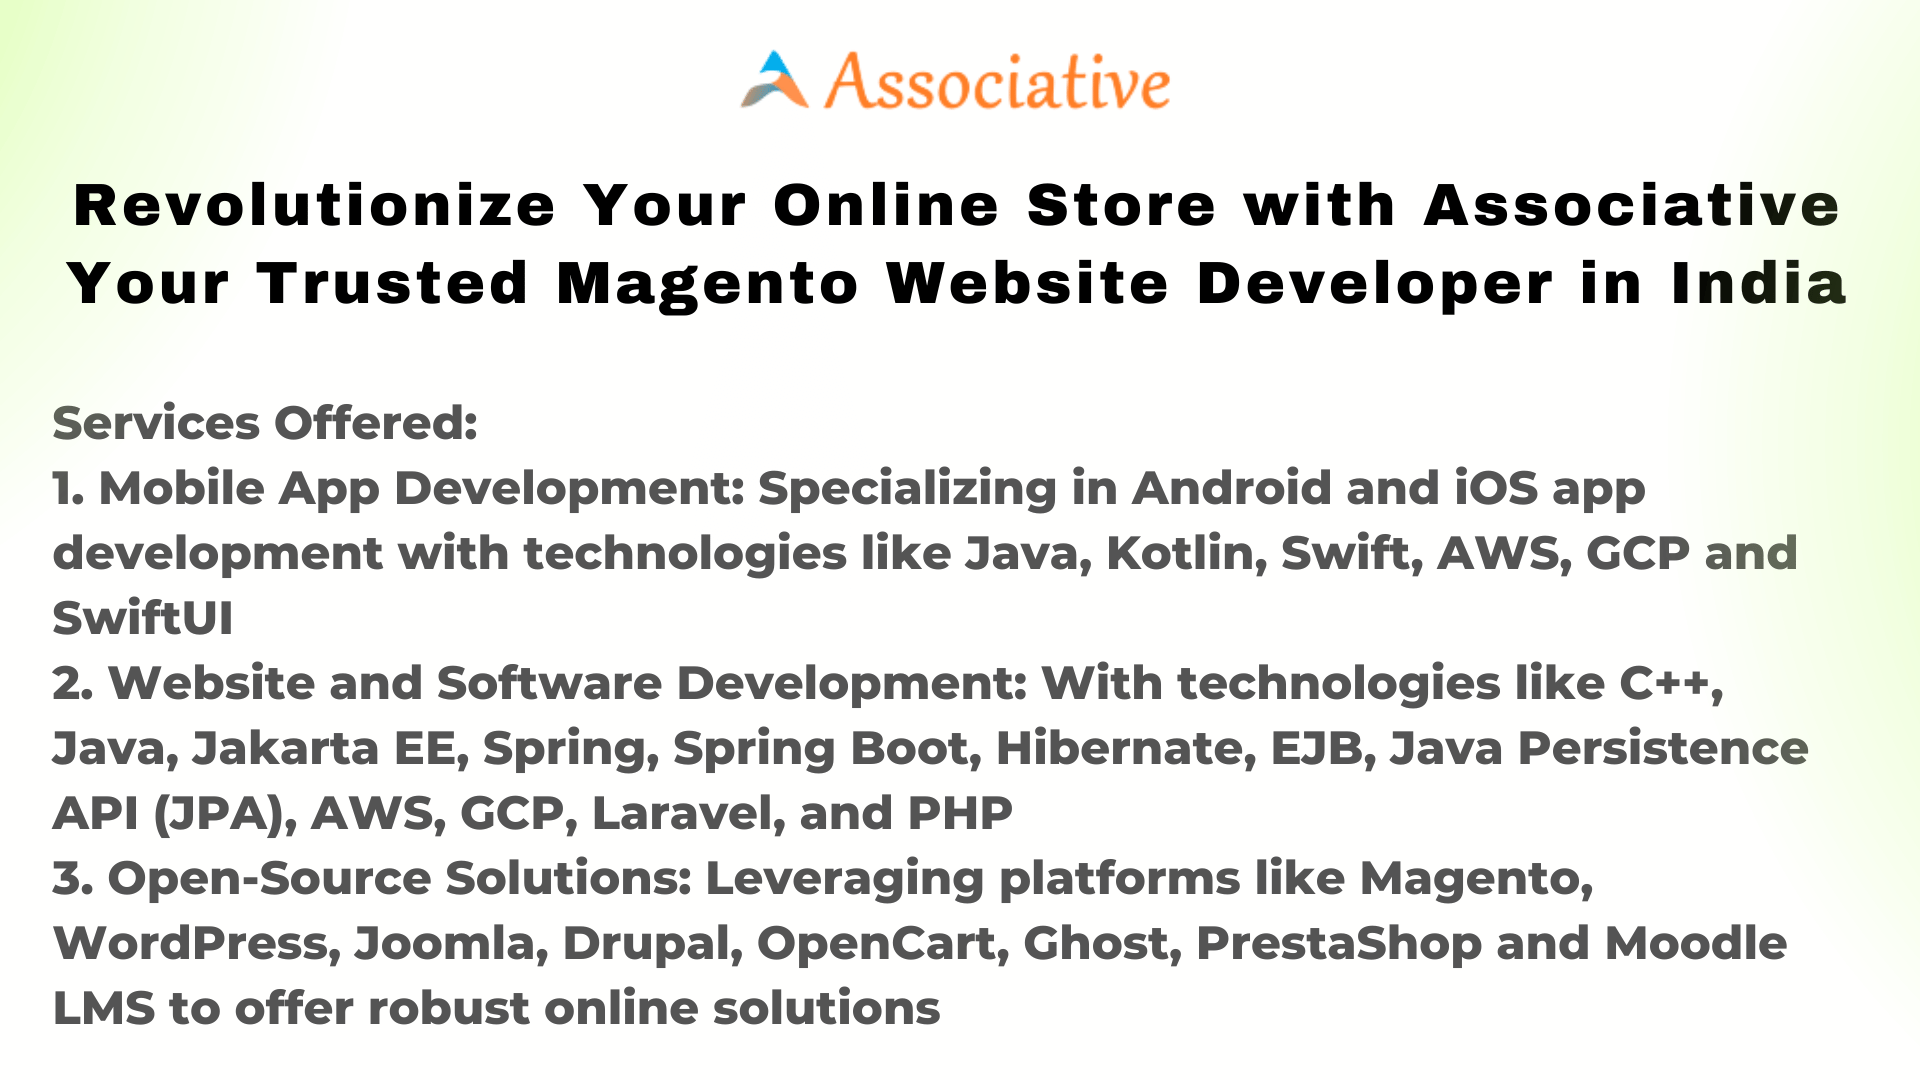 Revolutionize Your Online Store with Associative Your Trusted Magento Website Developer in India